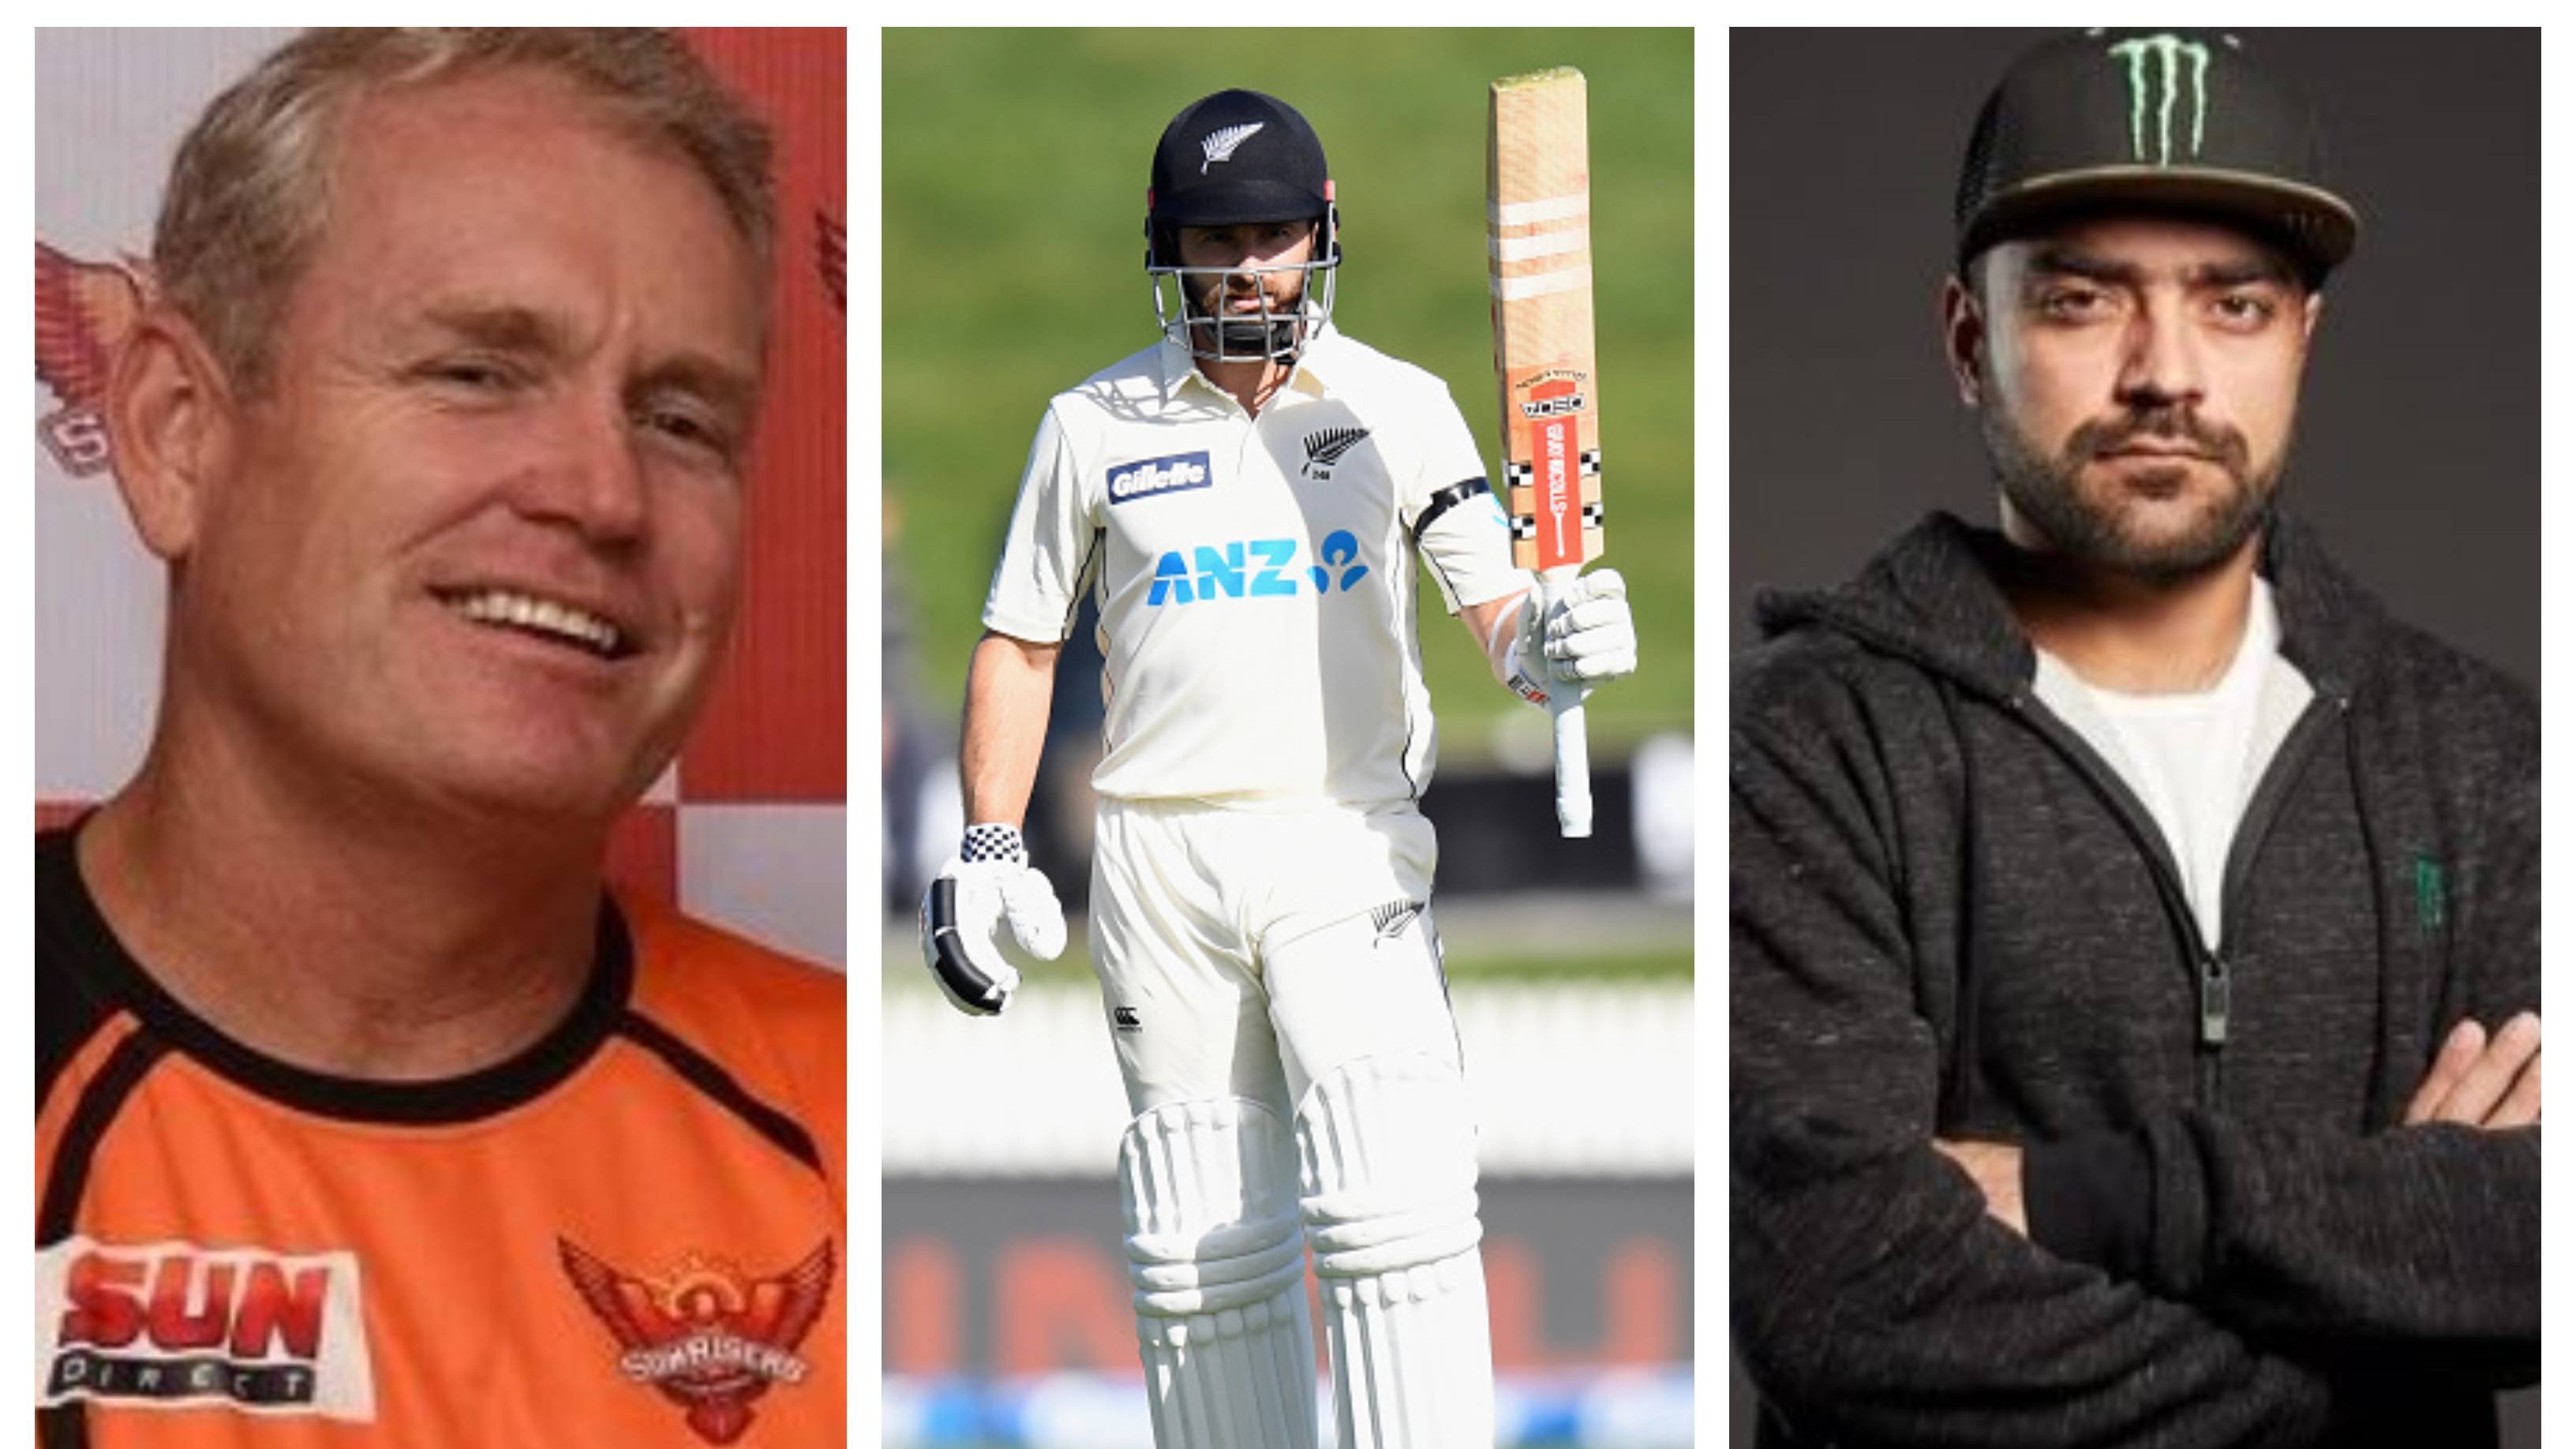 NZ v WI 2020: Cricket fraternity reacts as Kane Williamson’s 251 puts NZ in a commanding position in 1st Test